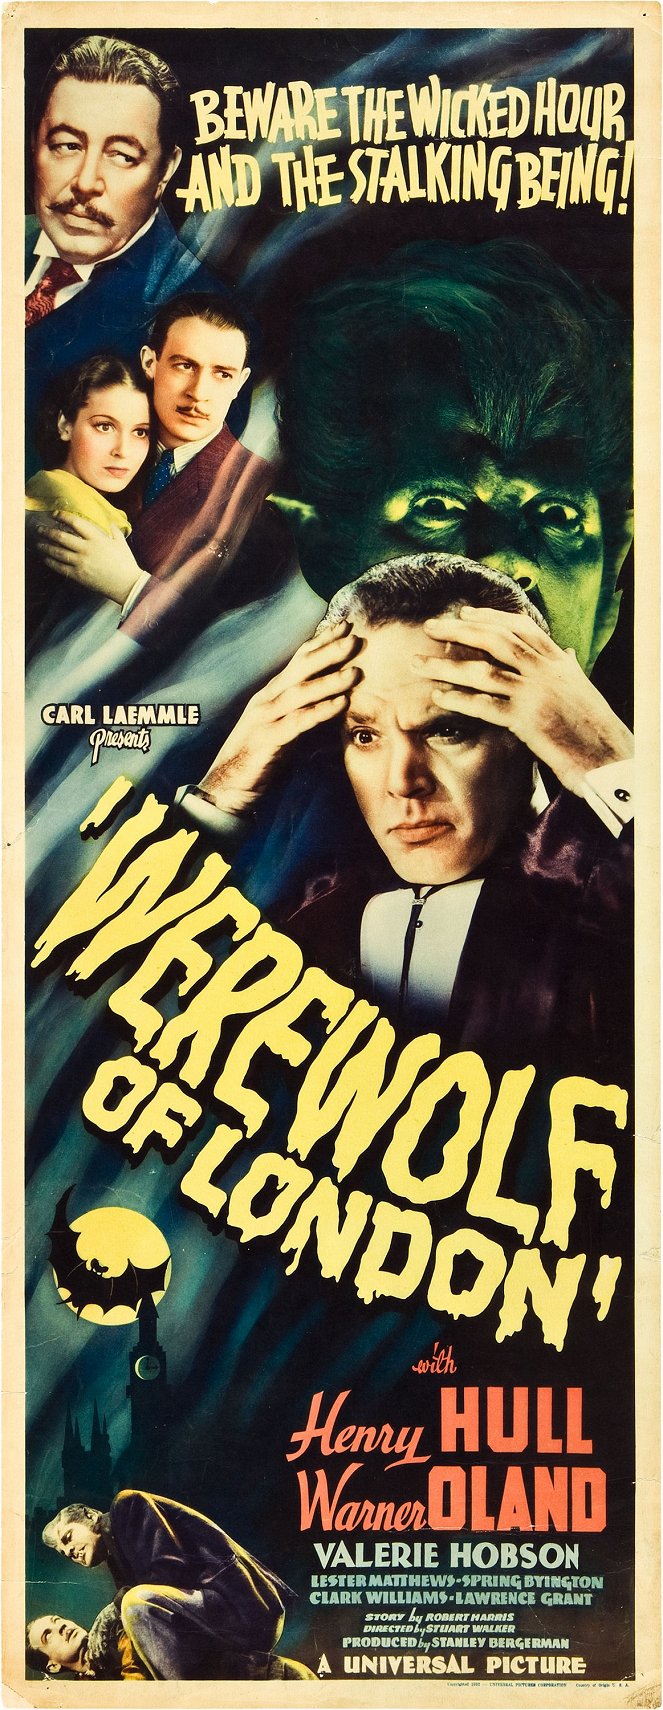 Werewolf of London - Posters